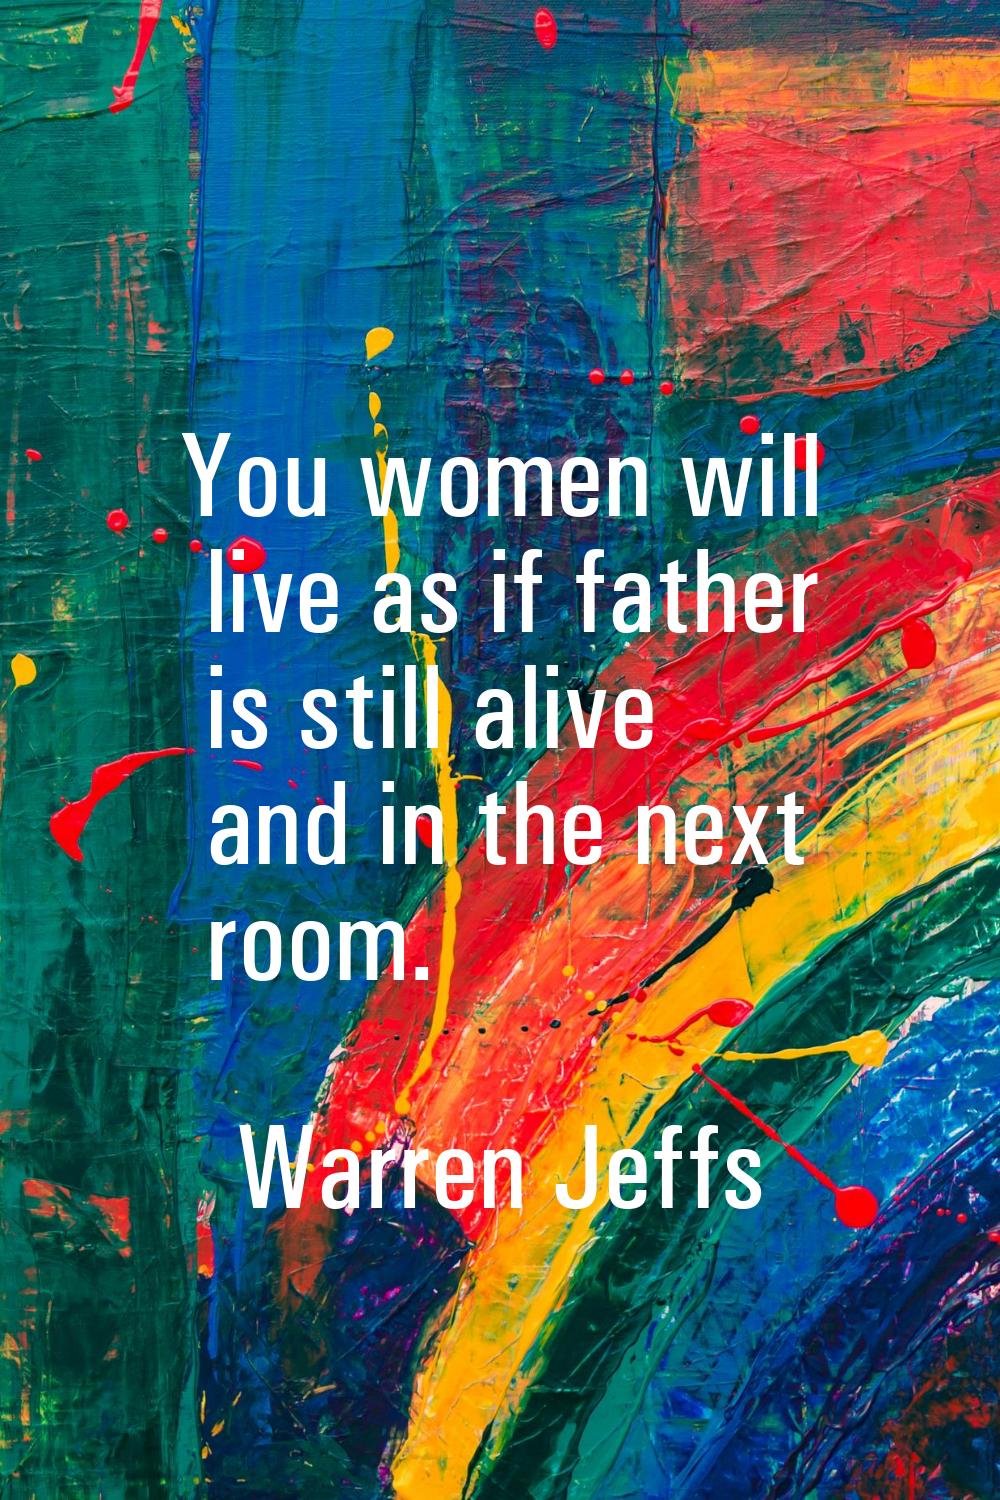 You women will live as if father is still alive and in the next room.